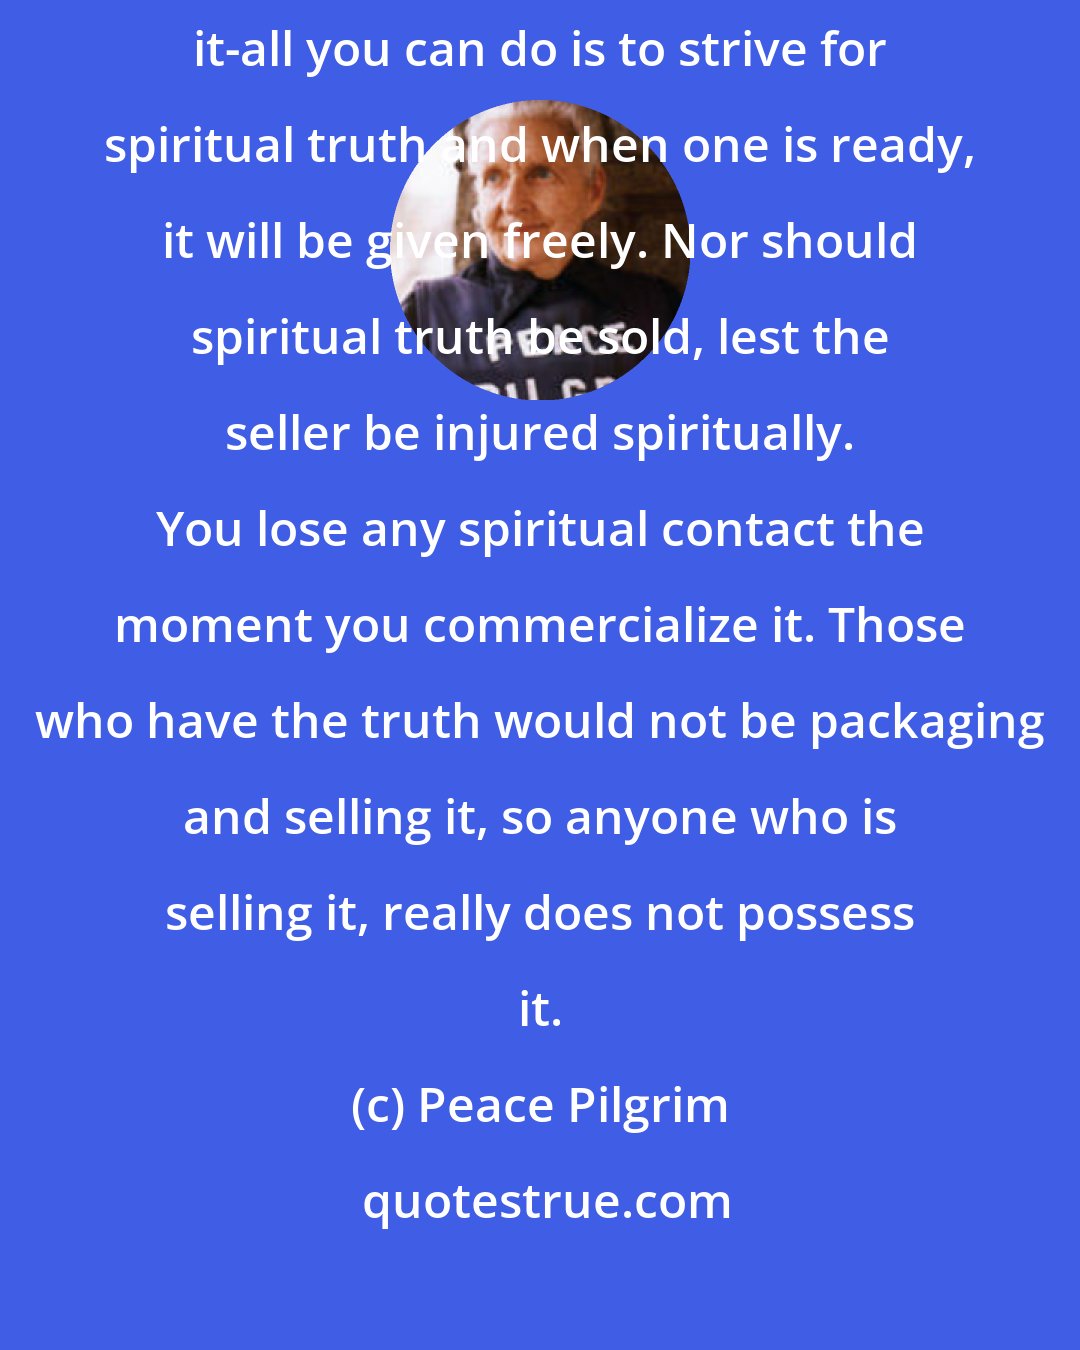 Peace Pilgrim: Truth is the pearl without price. One cannot obtain truth by buying it-all you can do is to strive for spiritual truth and when one is ready, it will be given freely. Nor should spiritual truth be sold, lest the seller be injured spiritually. You lose any spiritual contact the moment you commercialize it. Those who have the truth would not be packaging and selling it, so anyone who is selling it, really does not possess it.